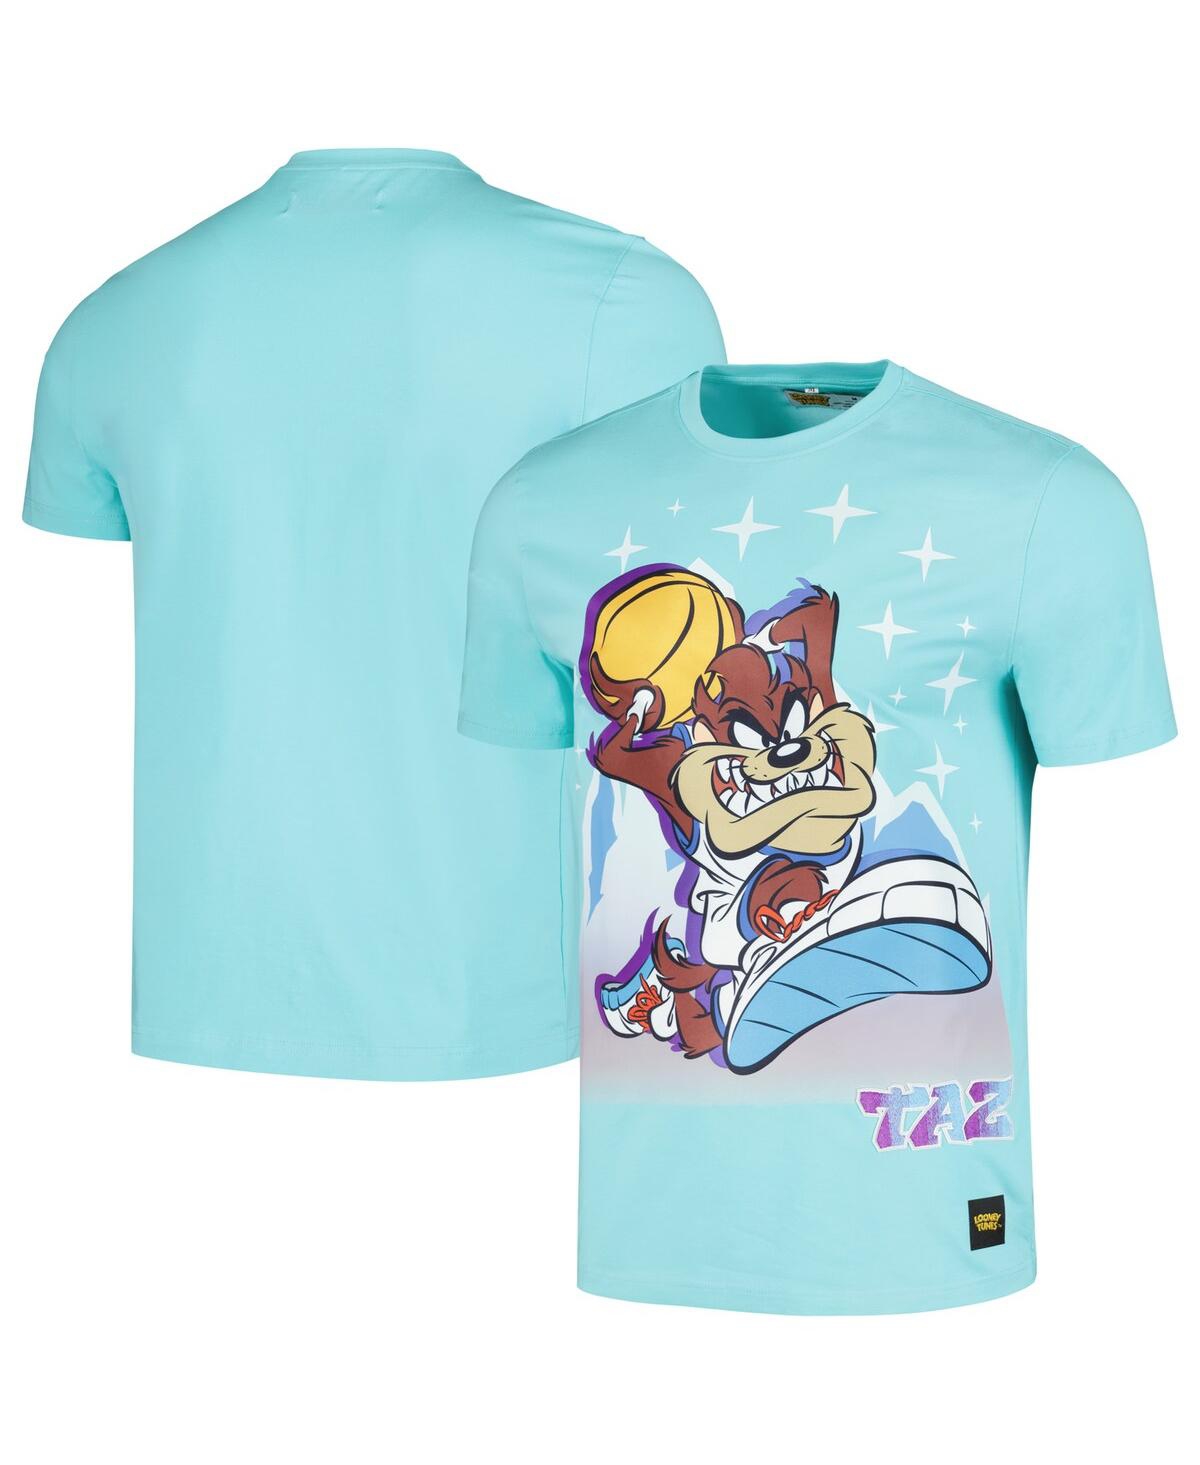 Men's and Women's Freeze Max Mint Looney Tunes Taz Tearin' Up The Mountain T-shirt - Mint